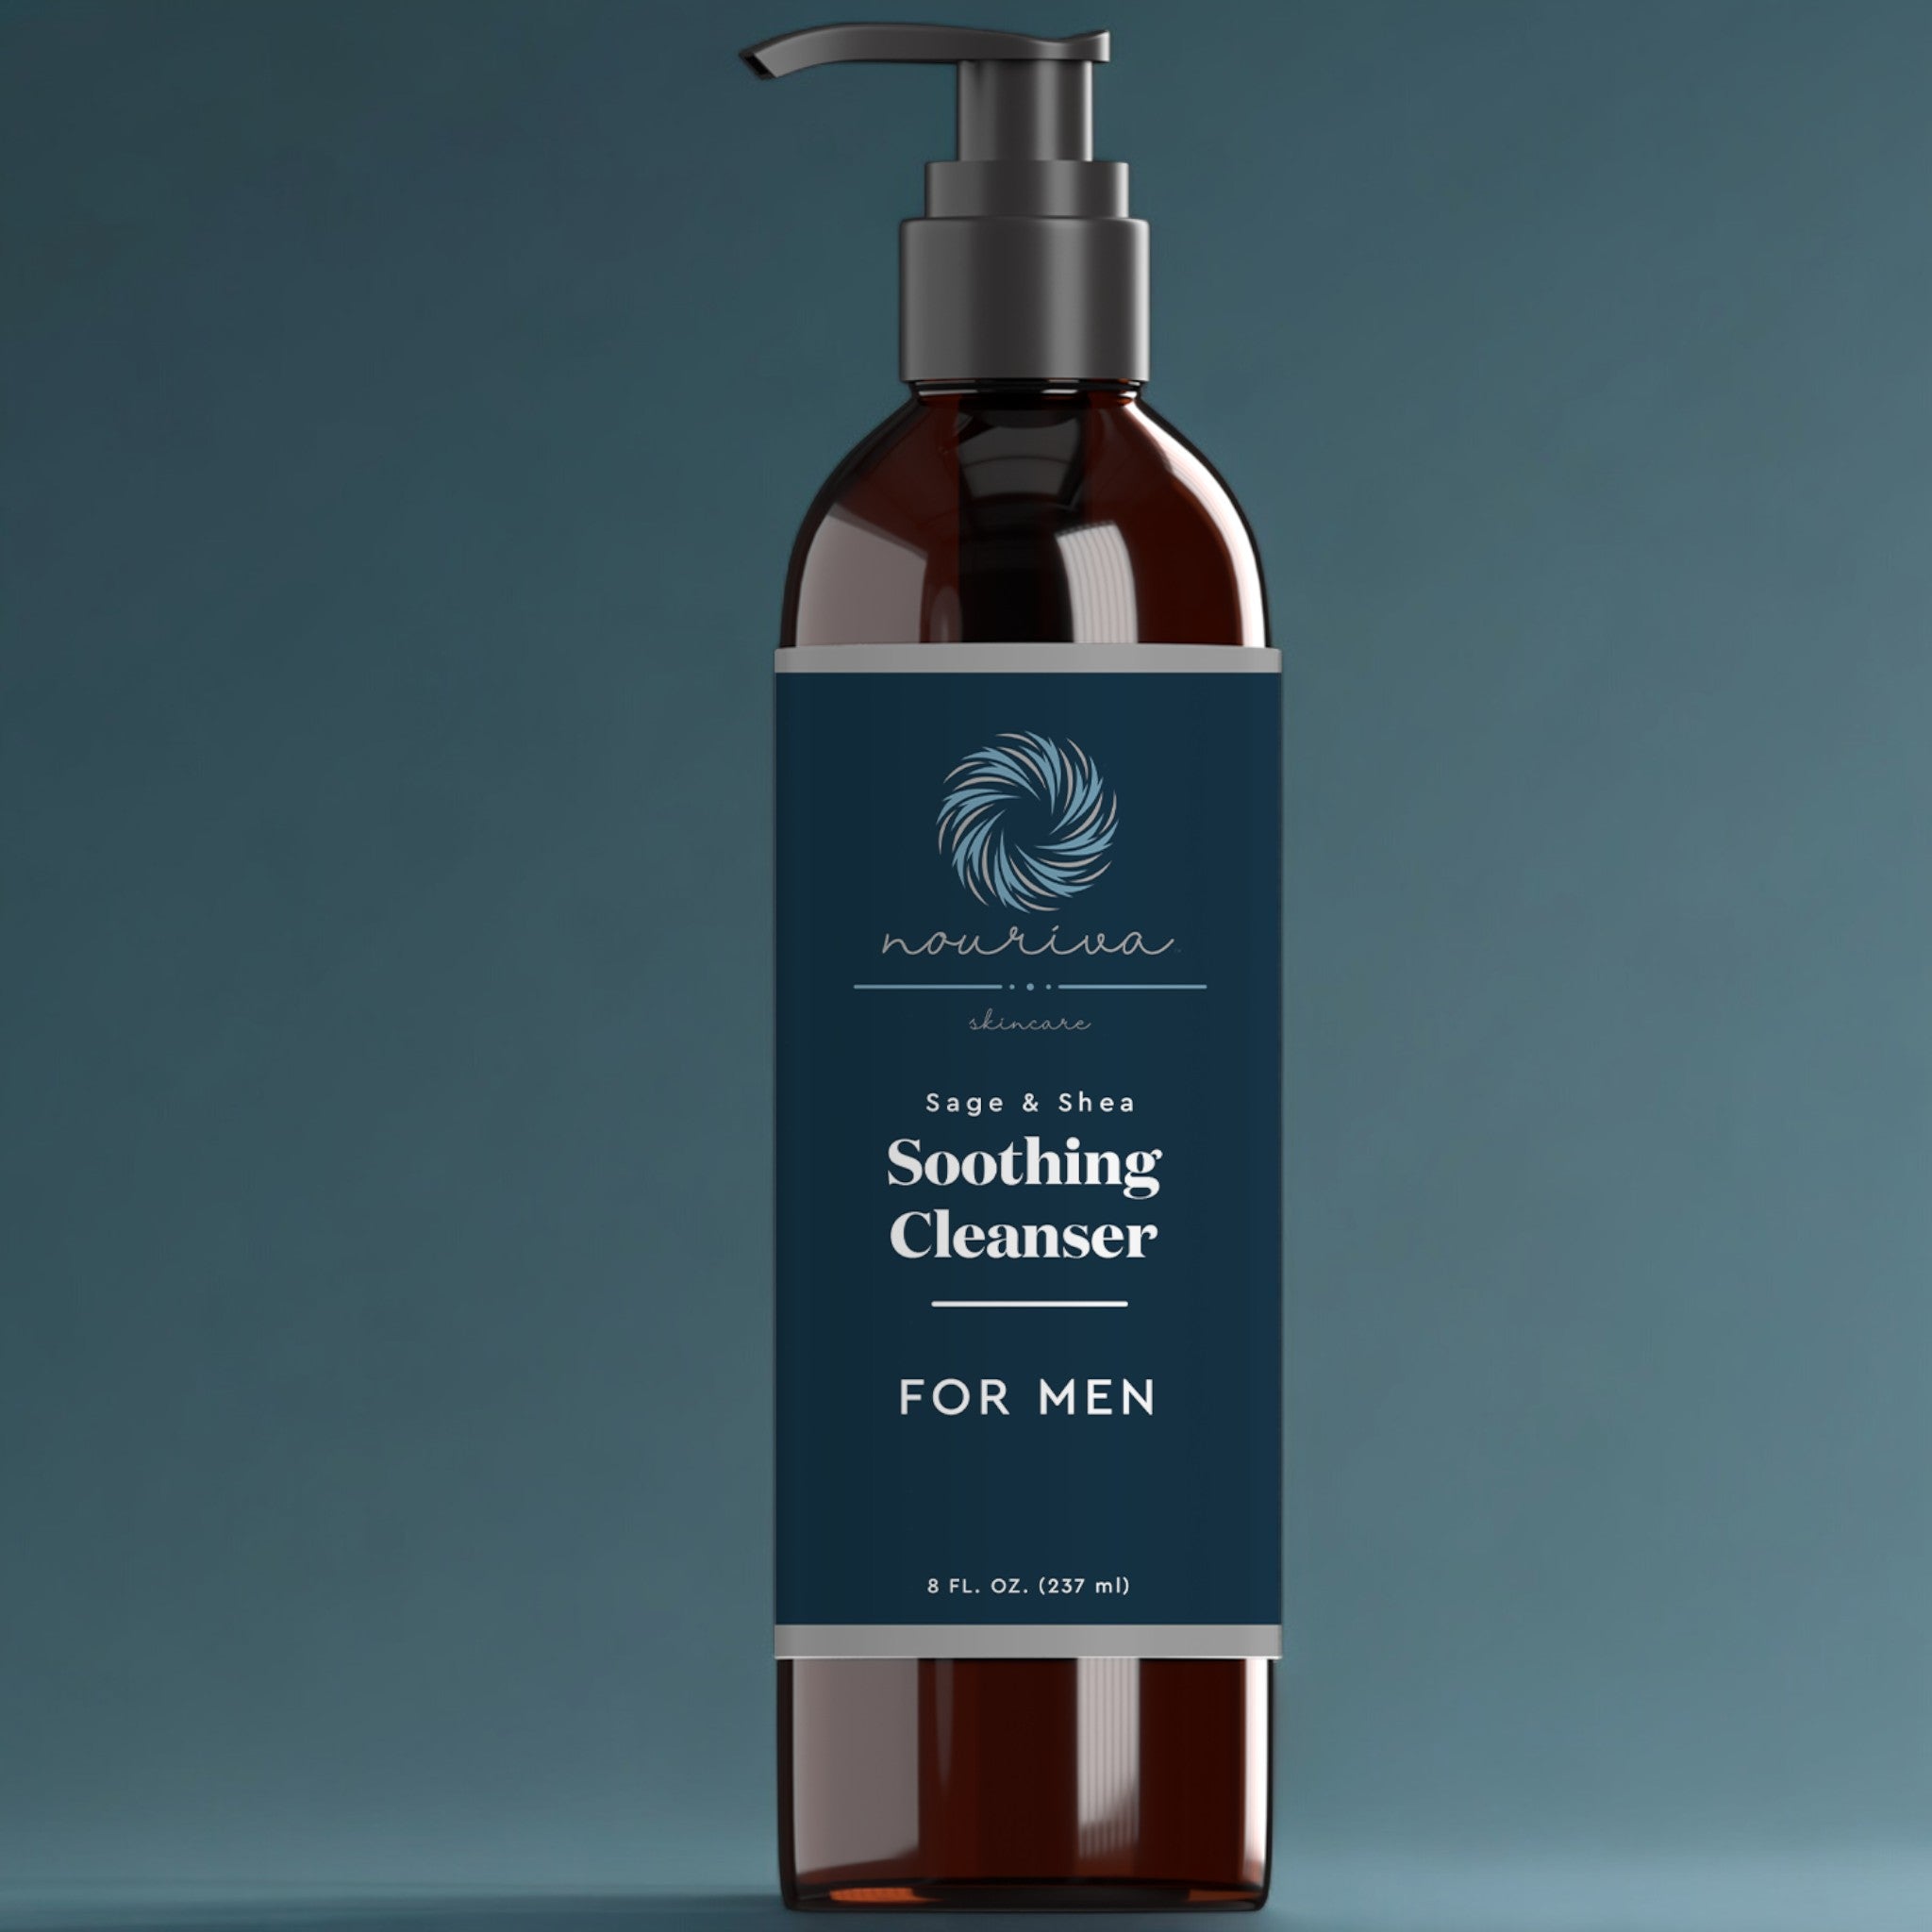 NEW! Men's Sage and Shea Soothing Cleanser